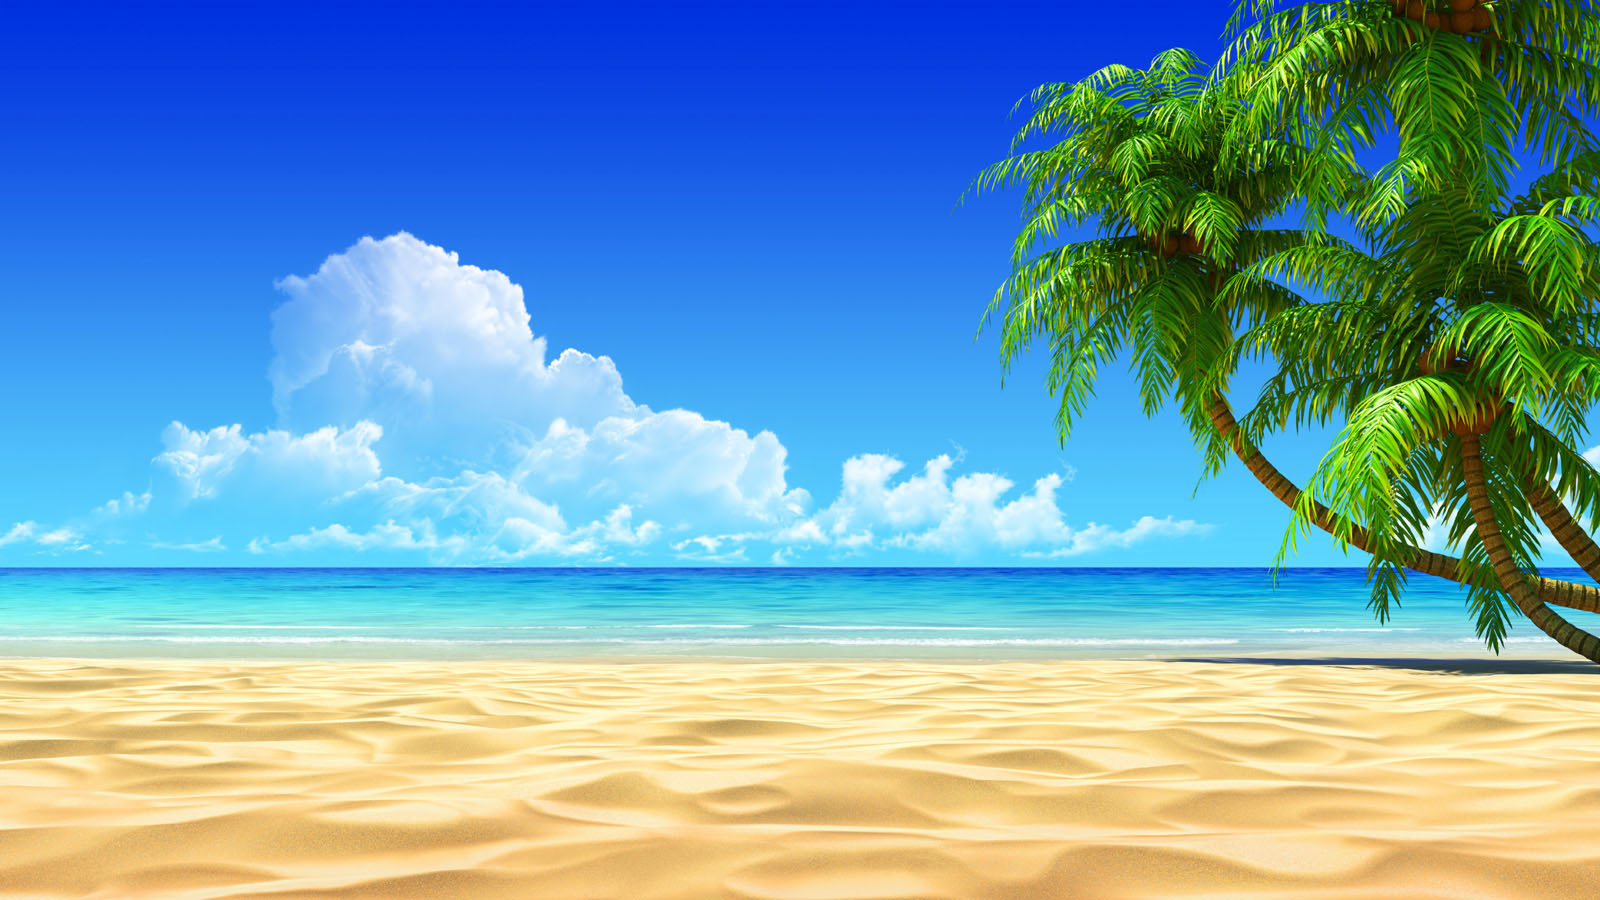 45 Beach Wallpaper For Mobile And Desktop In Full HD For 1600x900